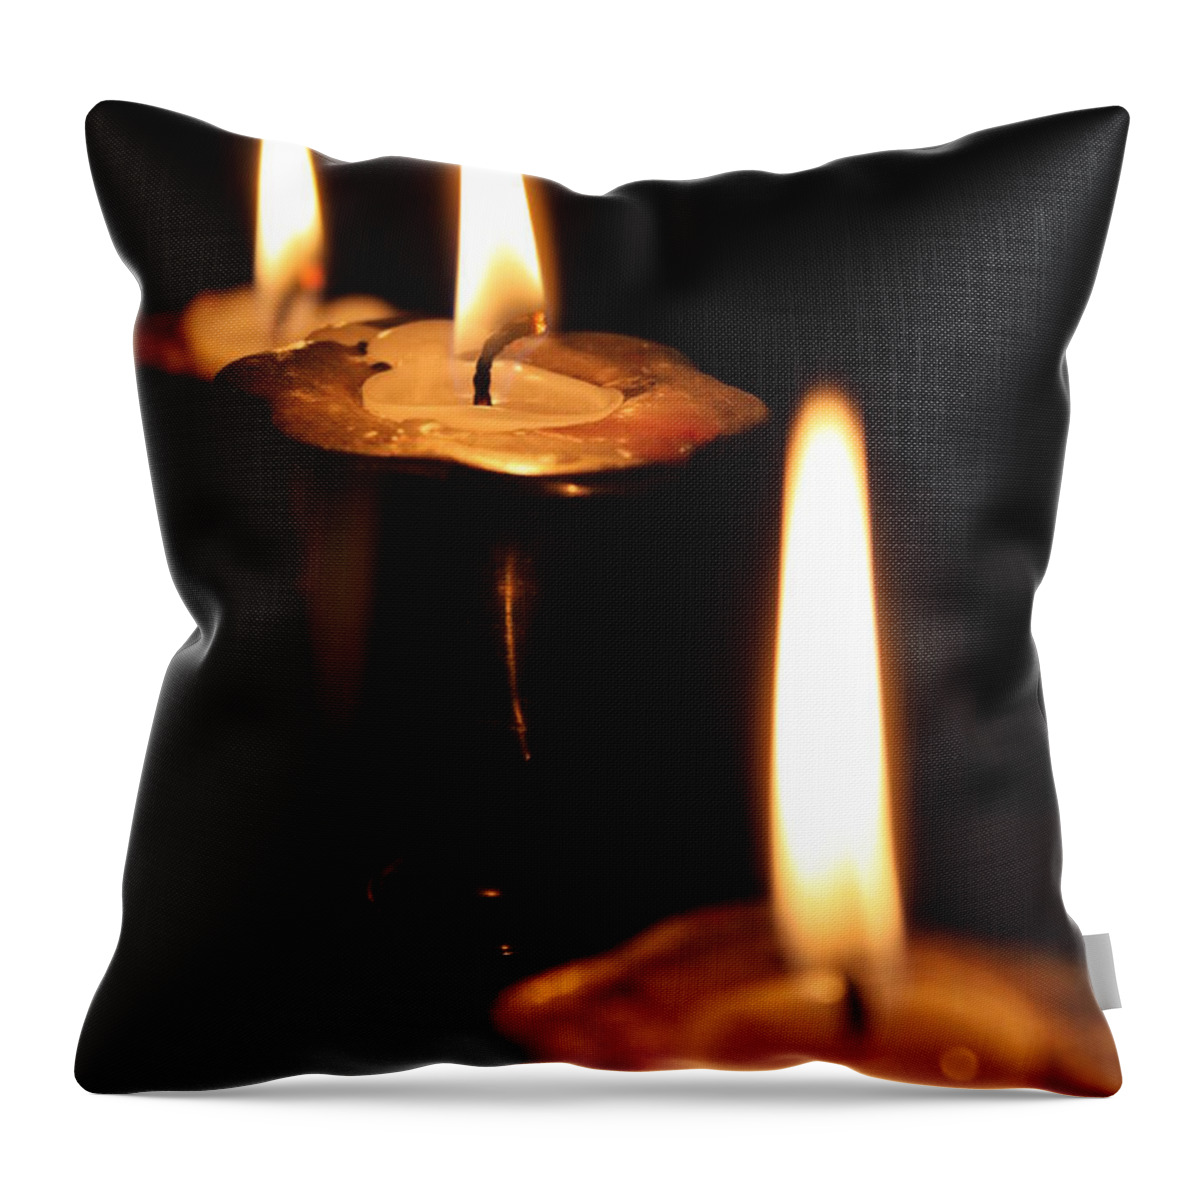 Candles Throw Pillow featuring the photograph Candlelight by Lauri Novak